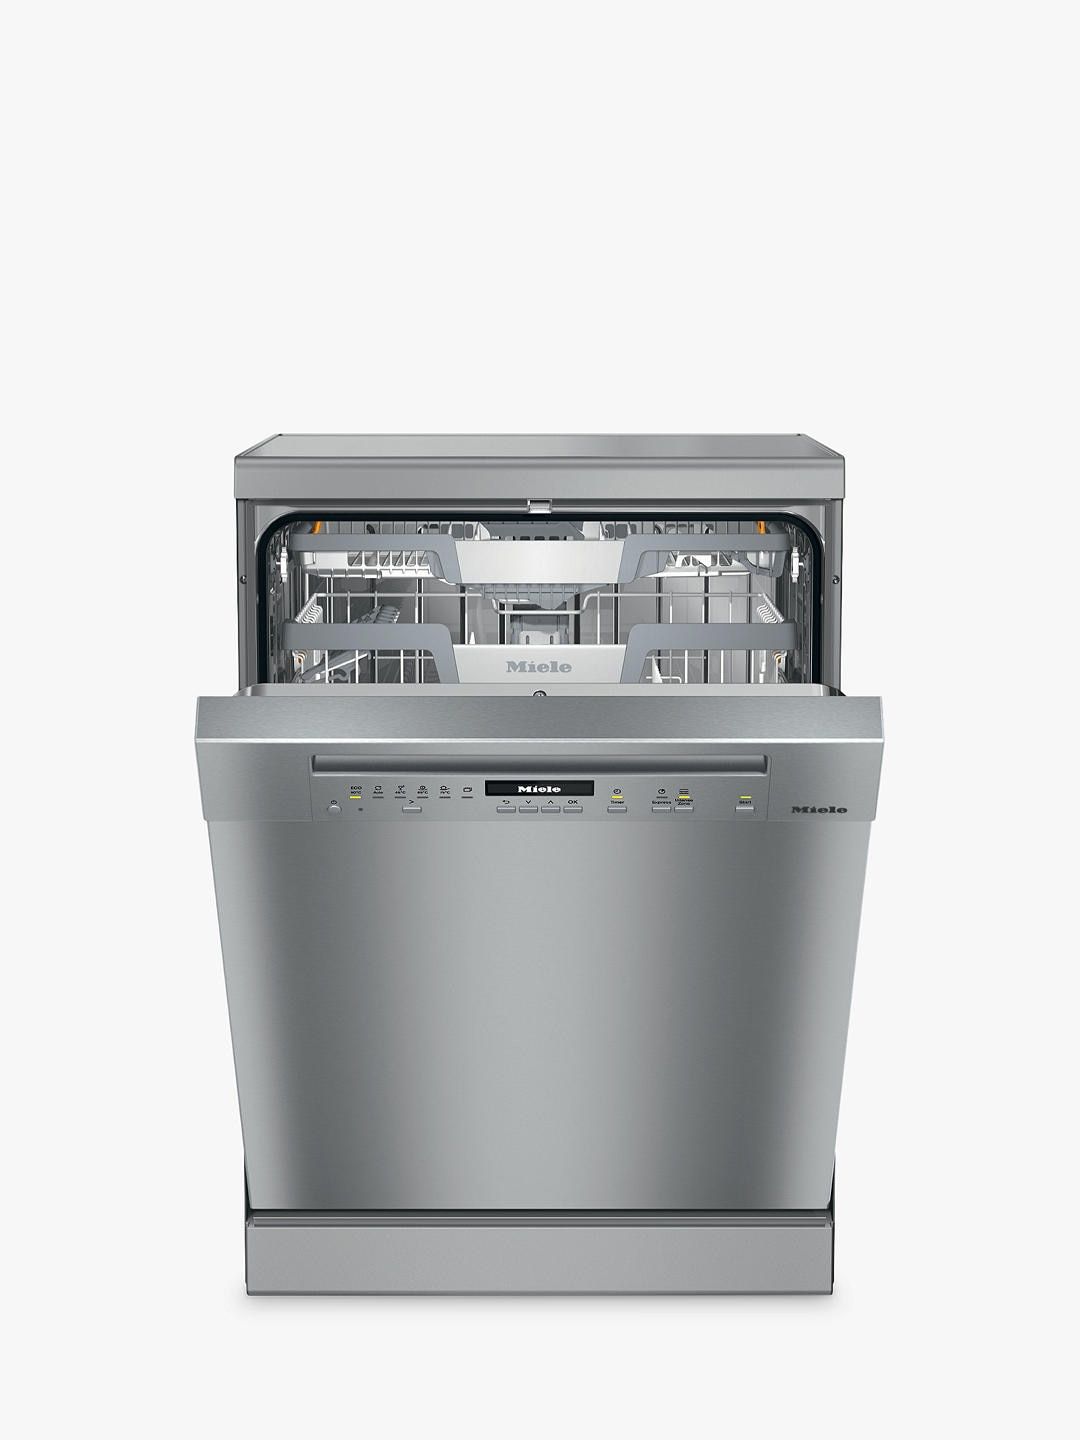 which recommended dishwasher